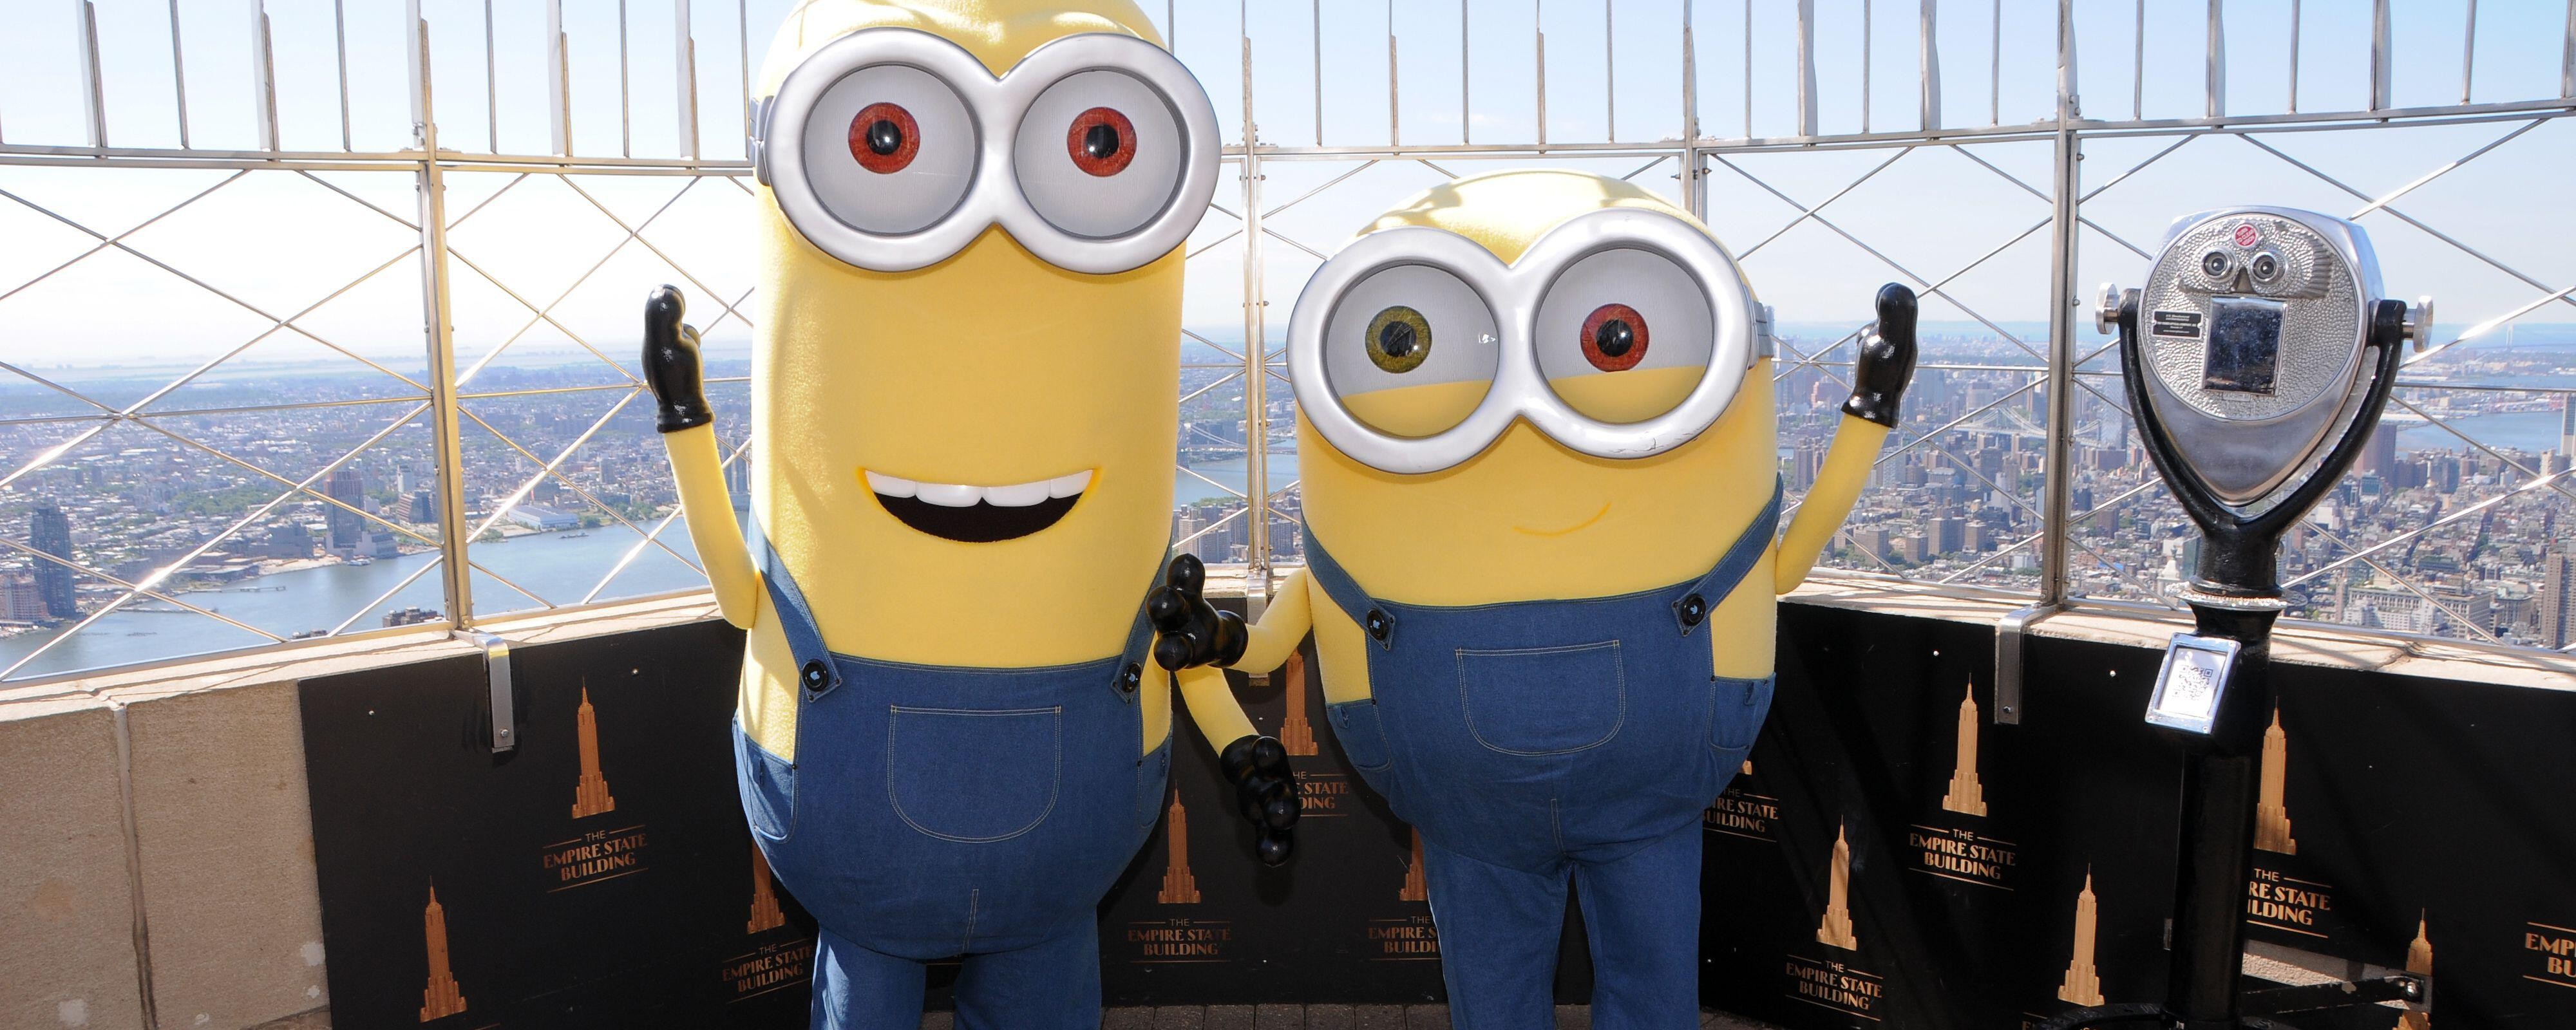 Why do so many people love the Minions of the Despicable Me franchise? -  Quora